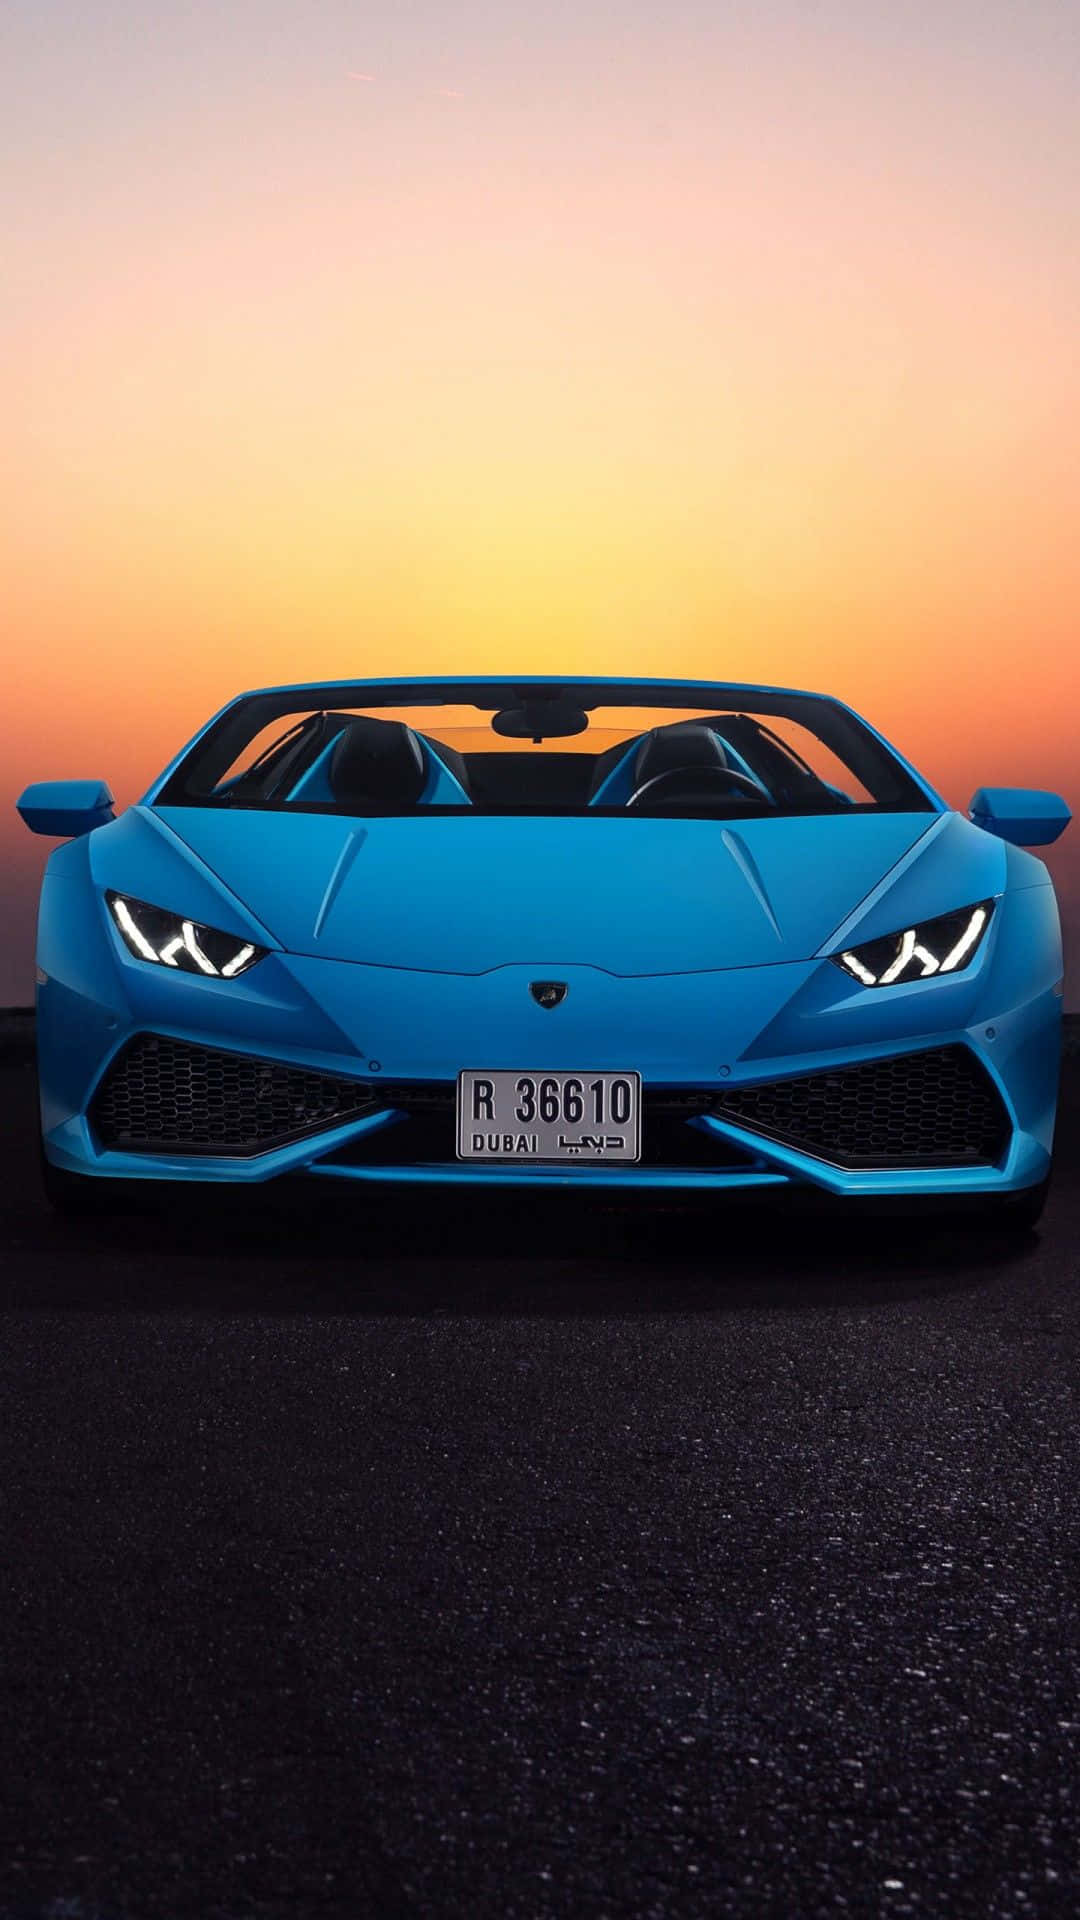 Get ready to cruise in luxury with this eye-catching Blue Lamborghini! Wallpaper